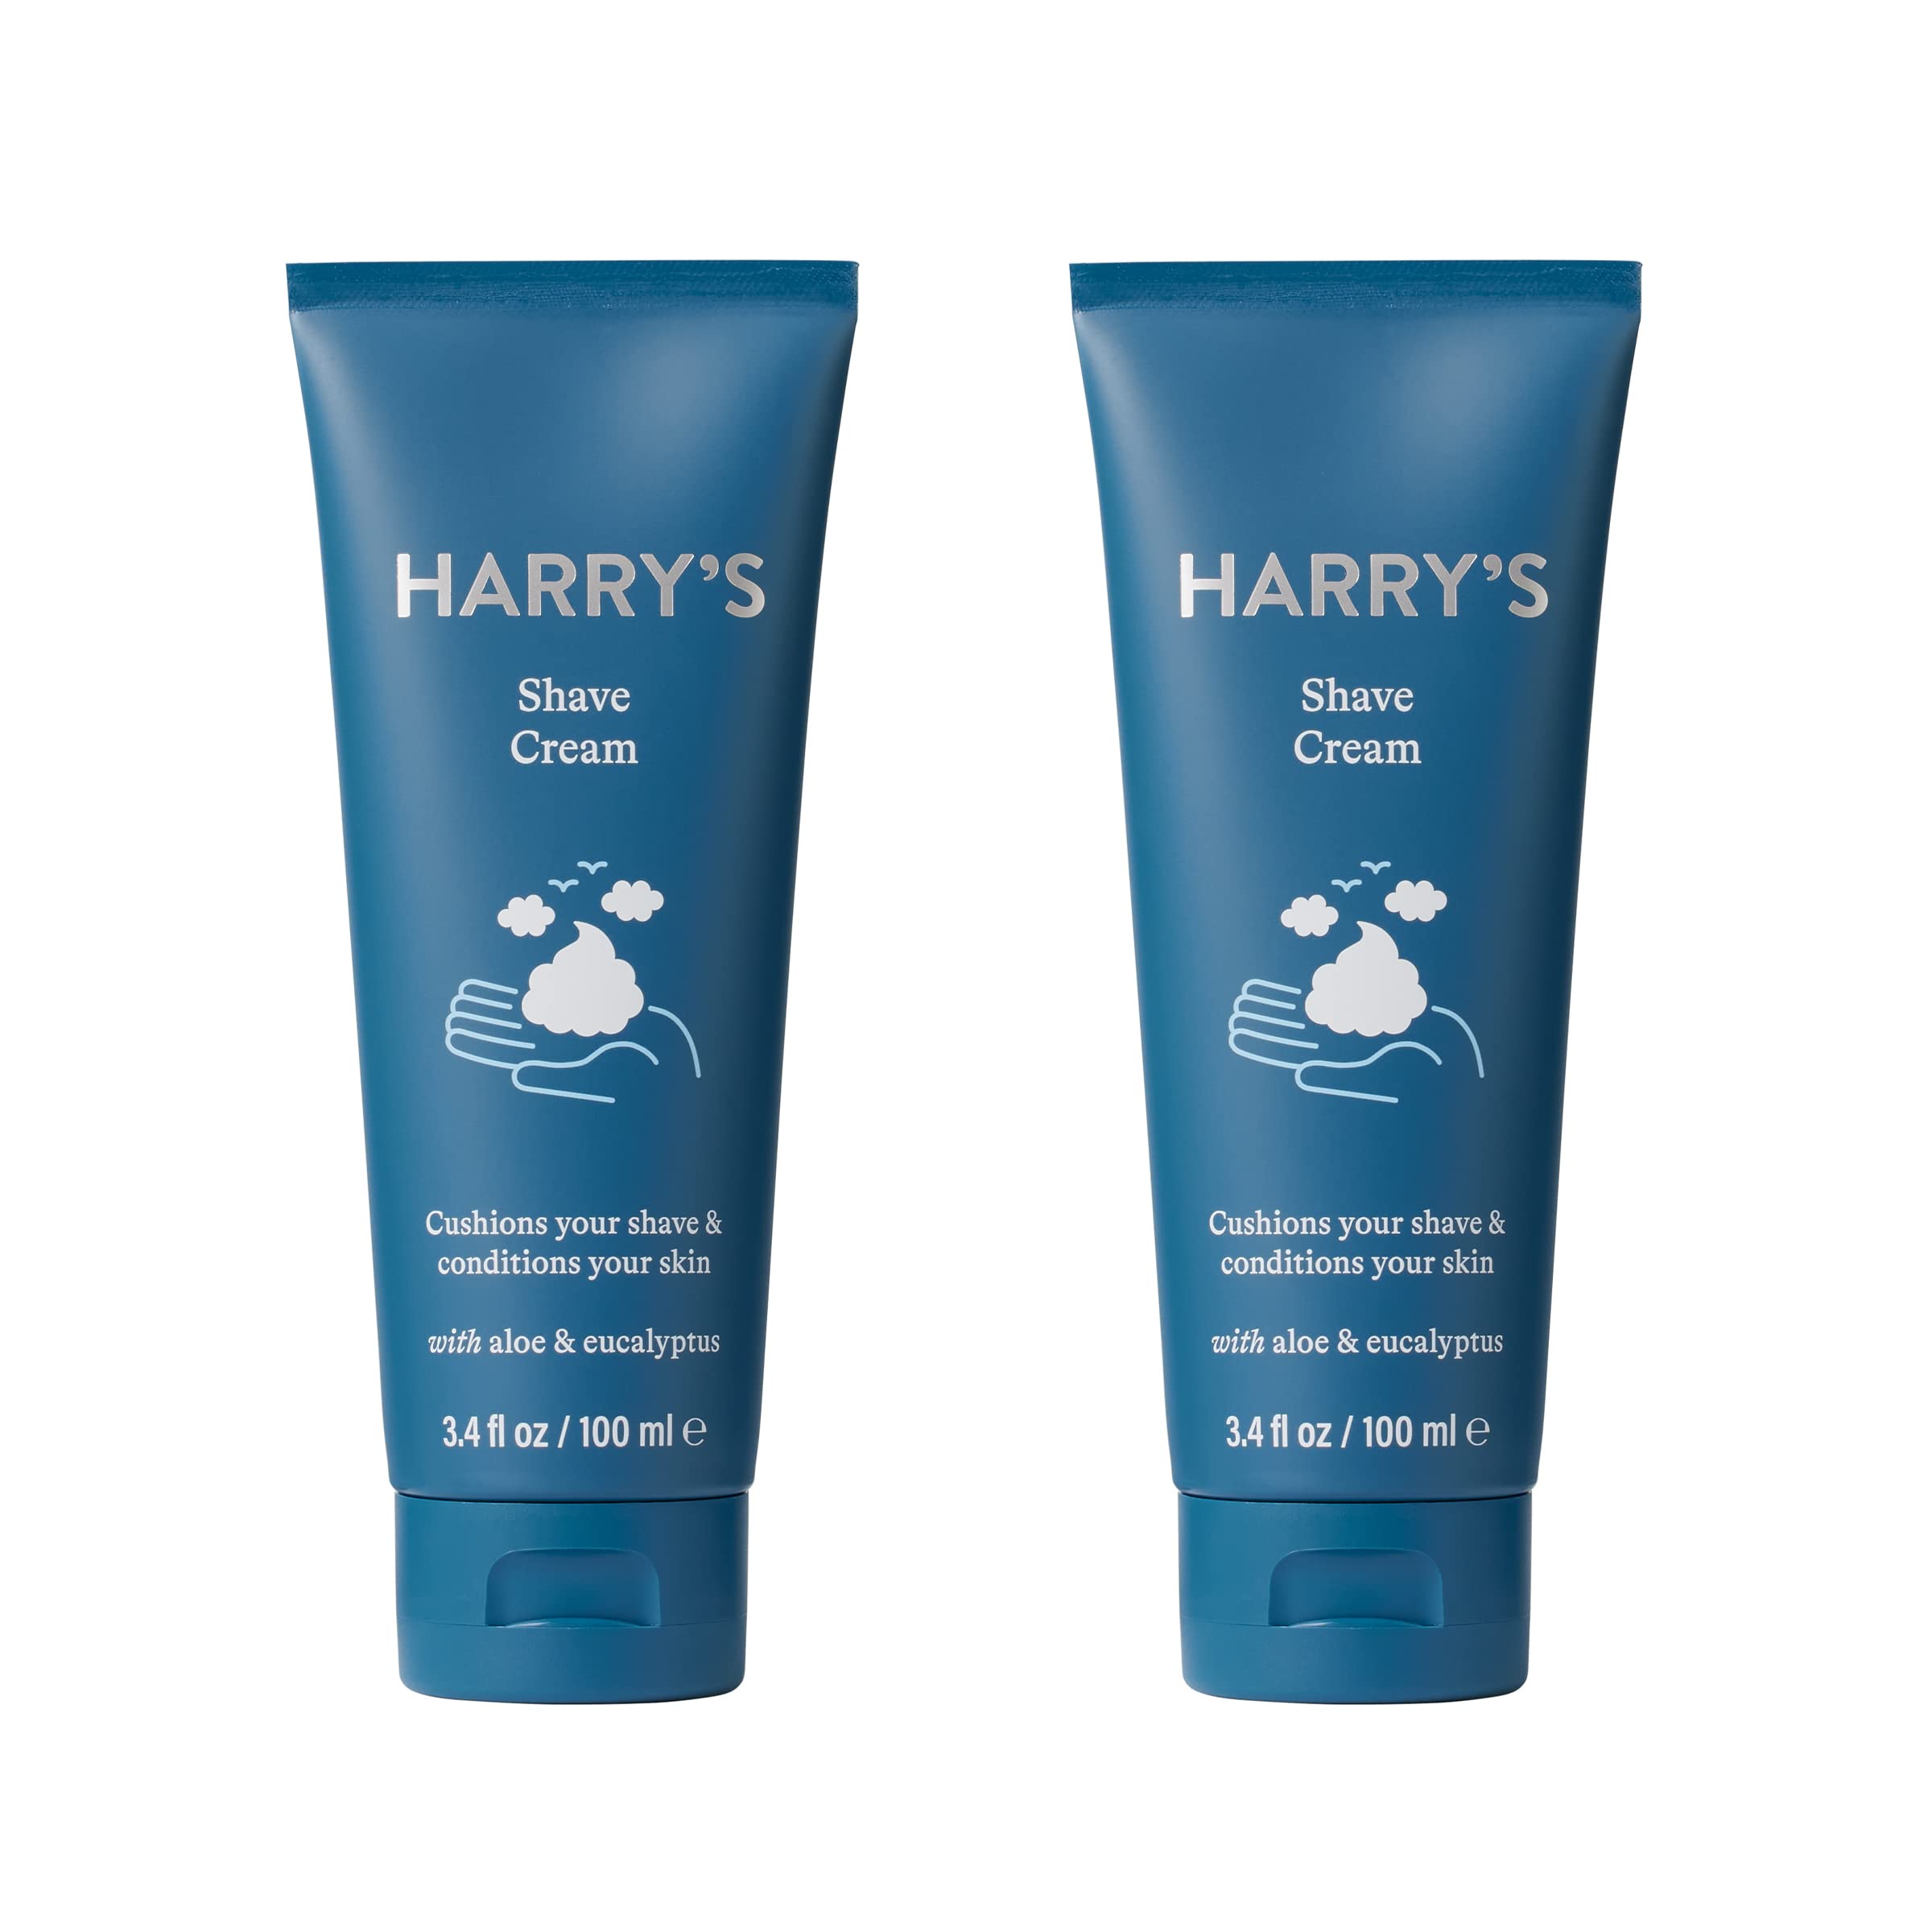 3 Count Harry's Shaving Cream for Men with Eucalyptus 2 pack (3X2=6 tubes) for $$30.98 + Free Shipping